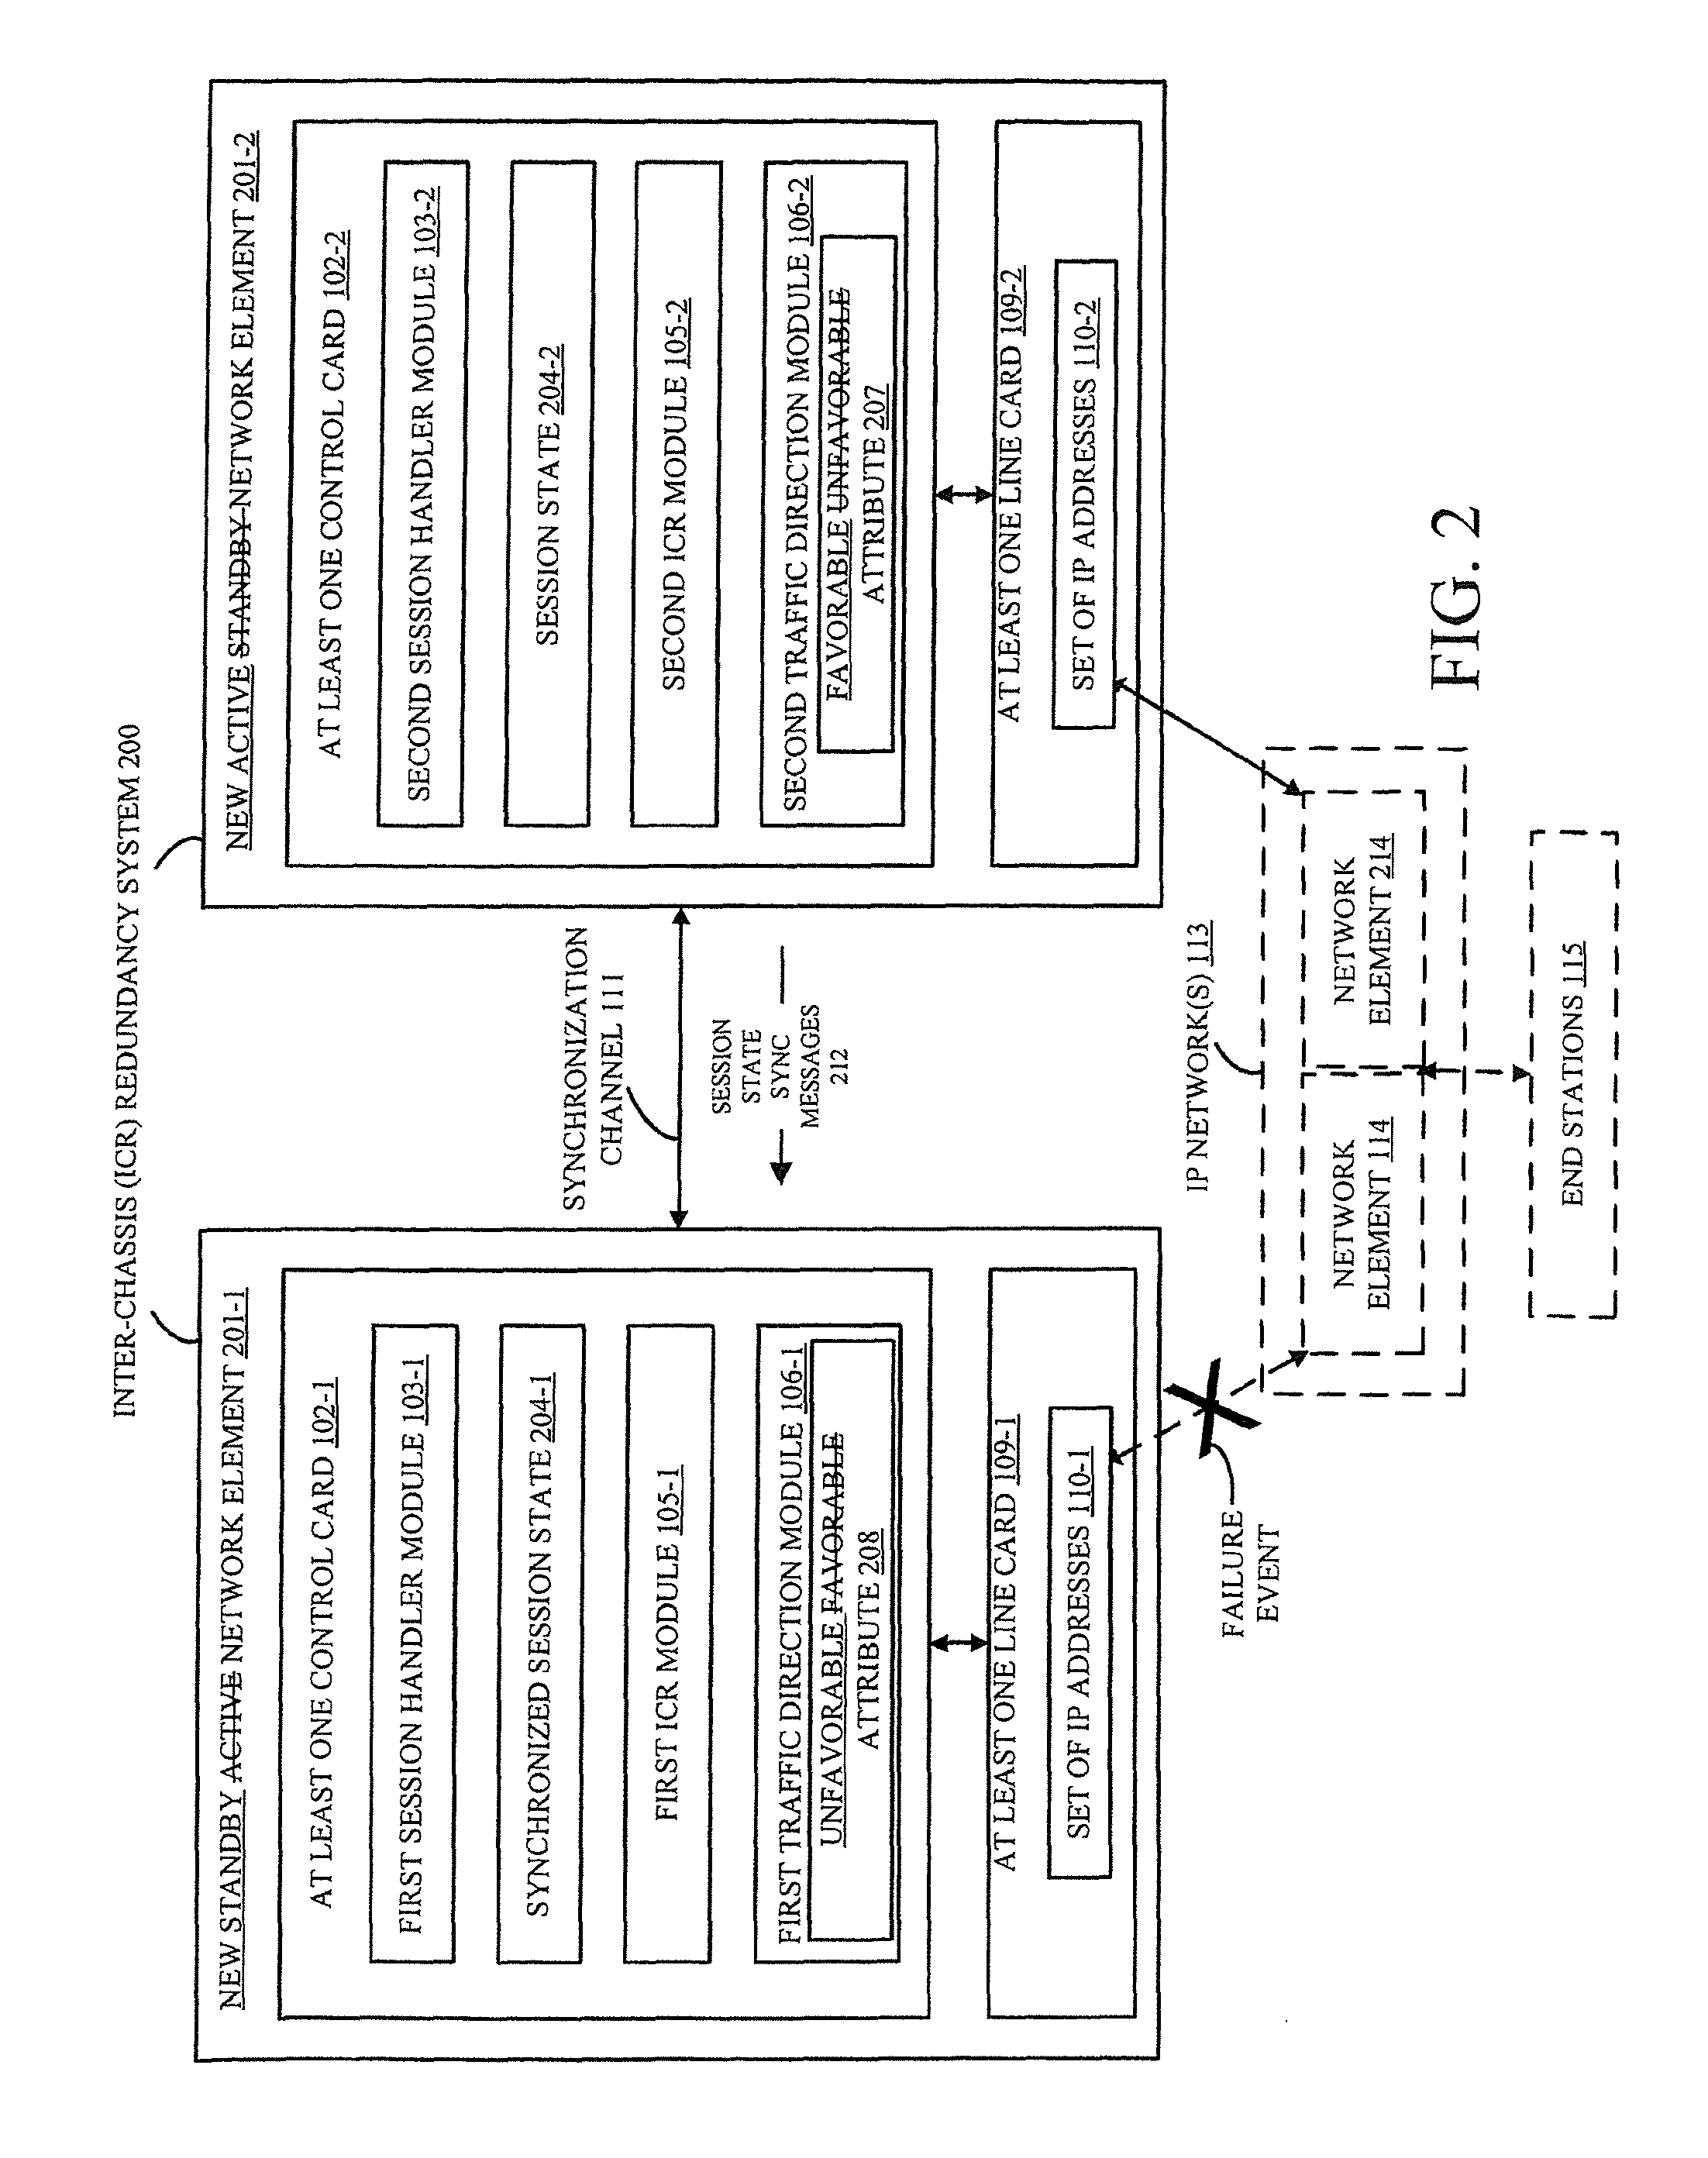 Inter-chassis redundancy with coordinated traffic direction